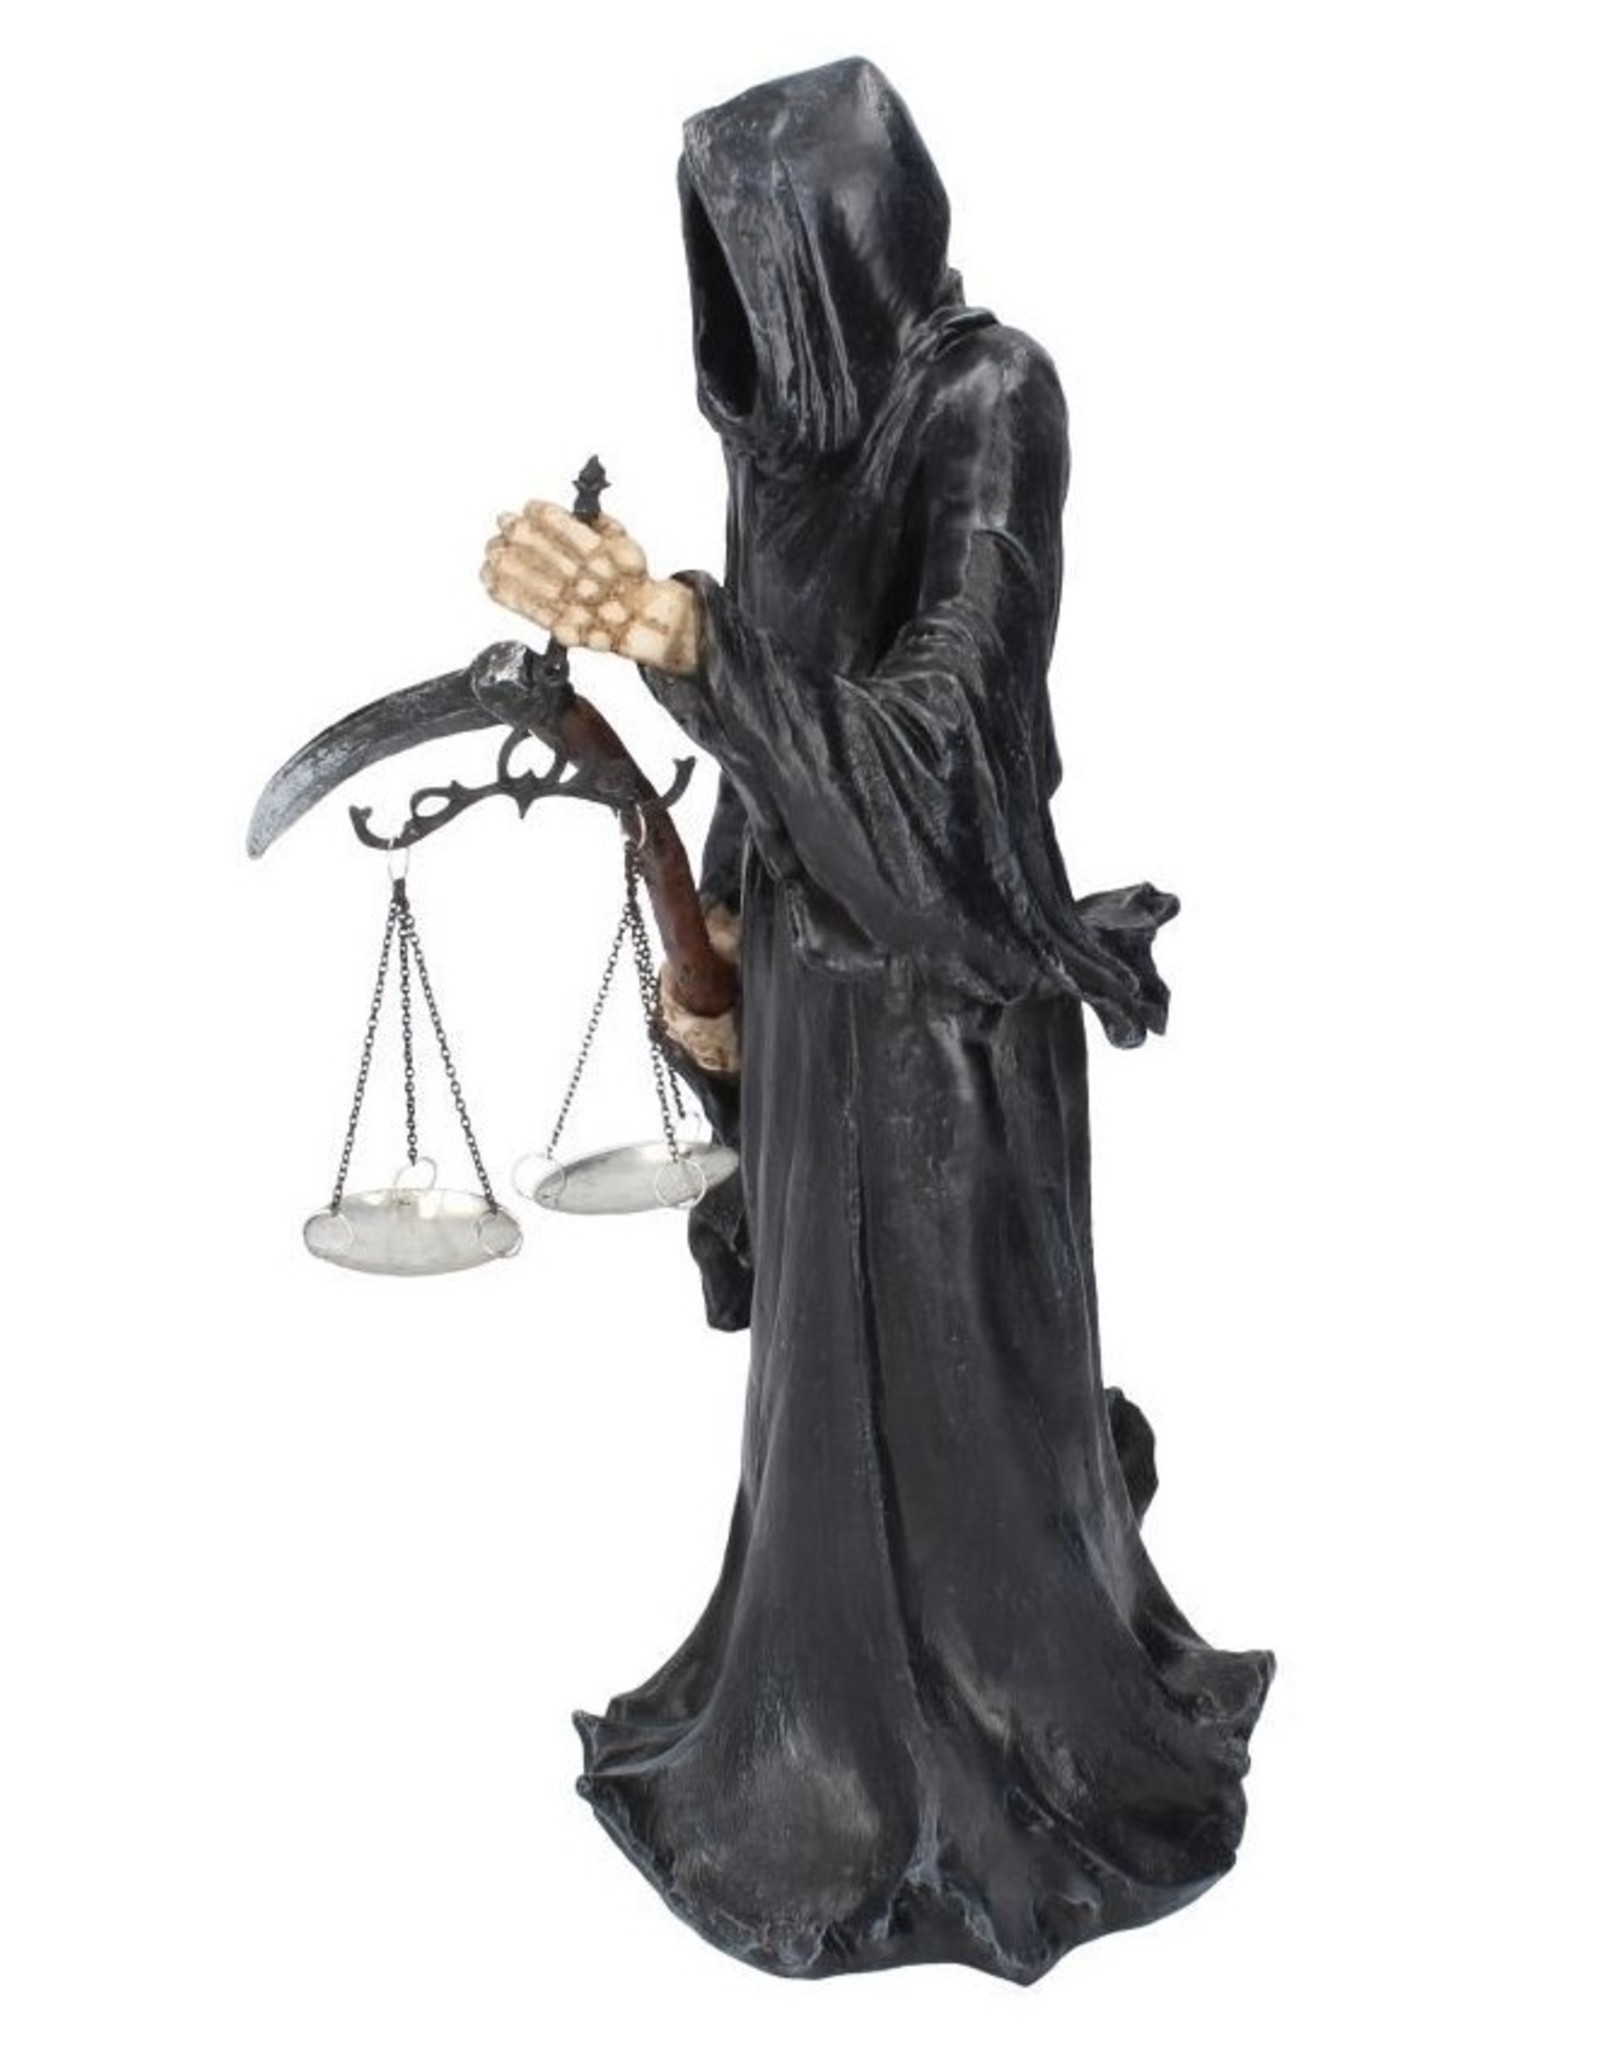 NemesisNow Giftware Figurines Collectables - Reaper Figurine Final Check 40cm